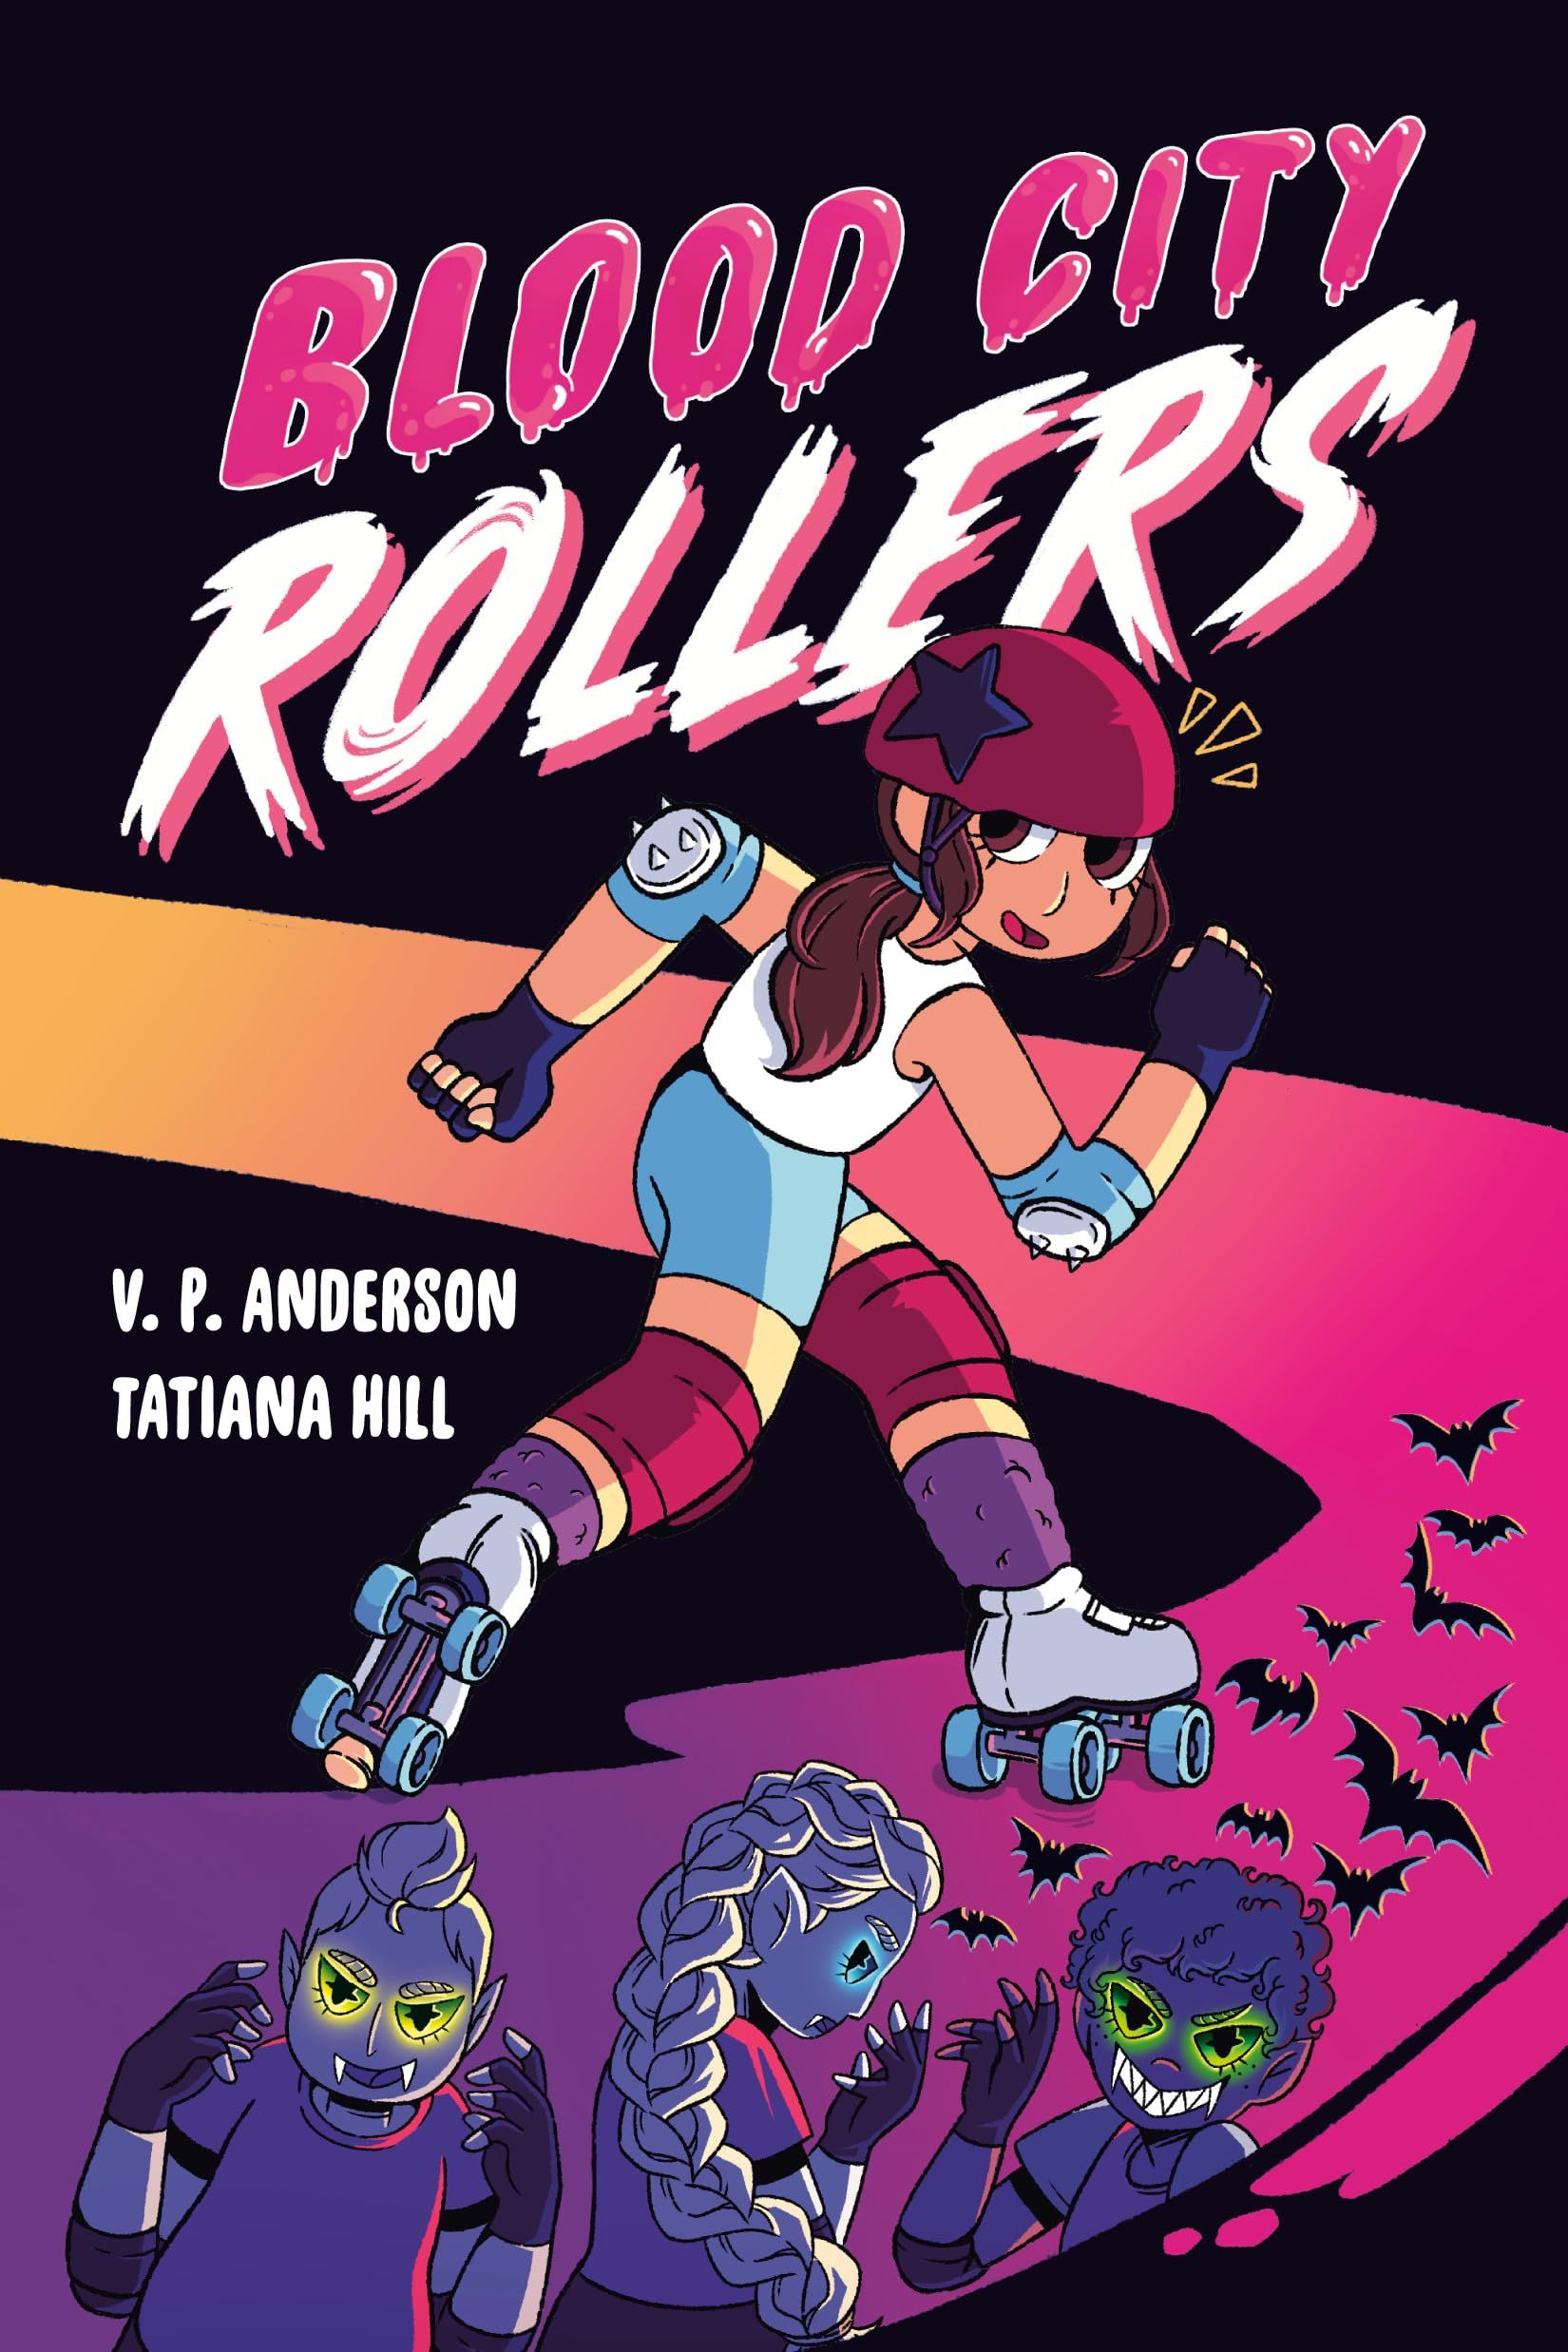 Blood City Rollers comic book cover